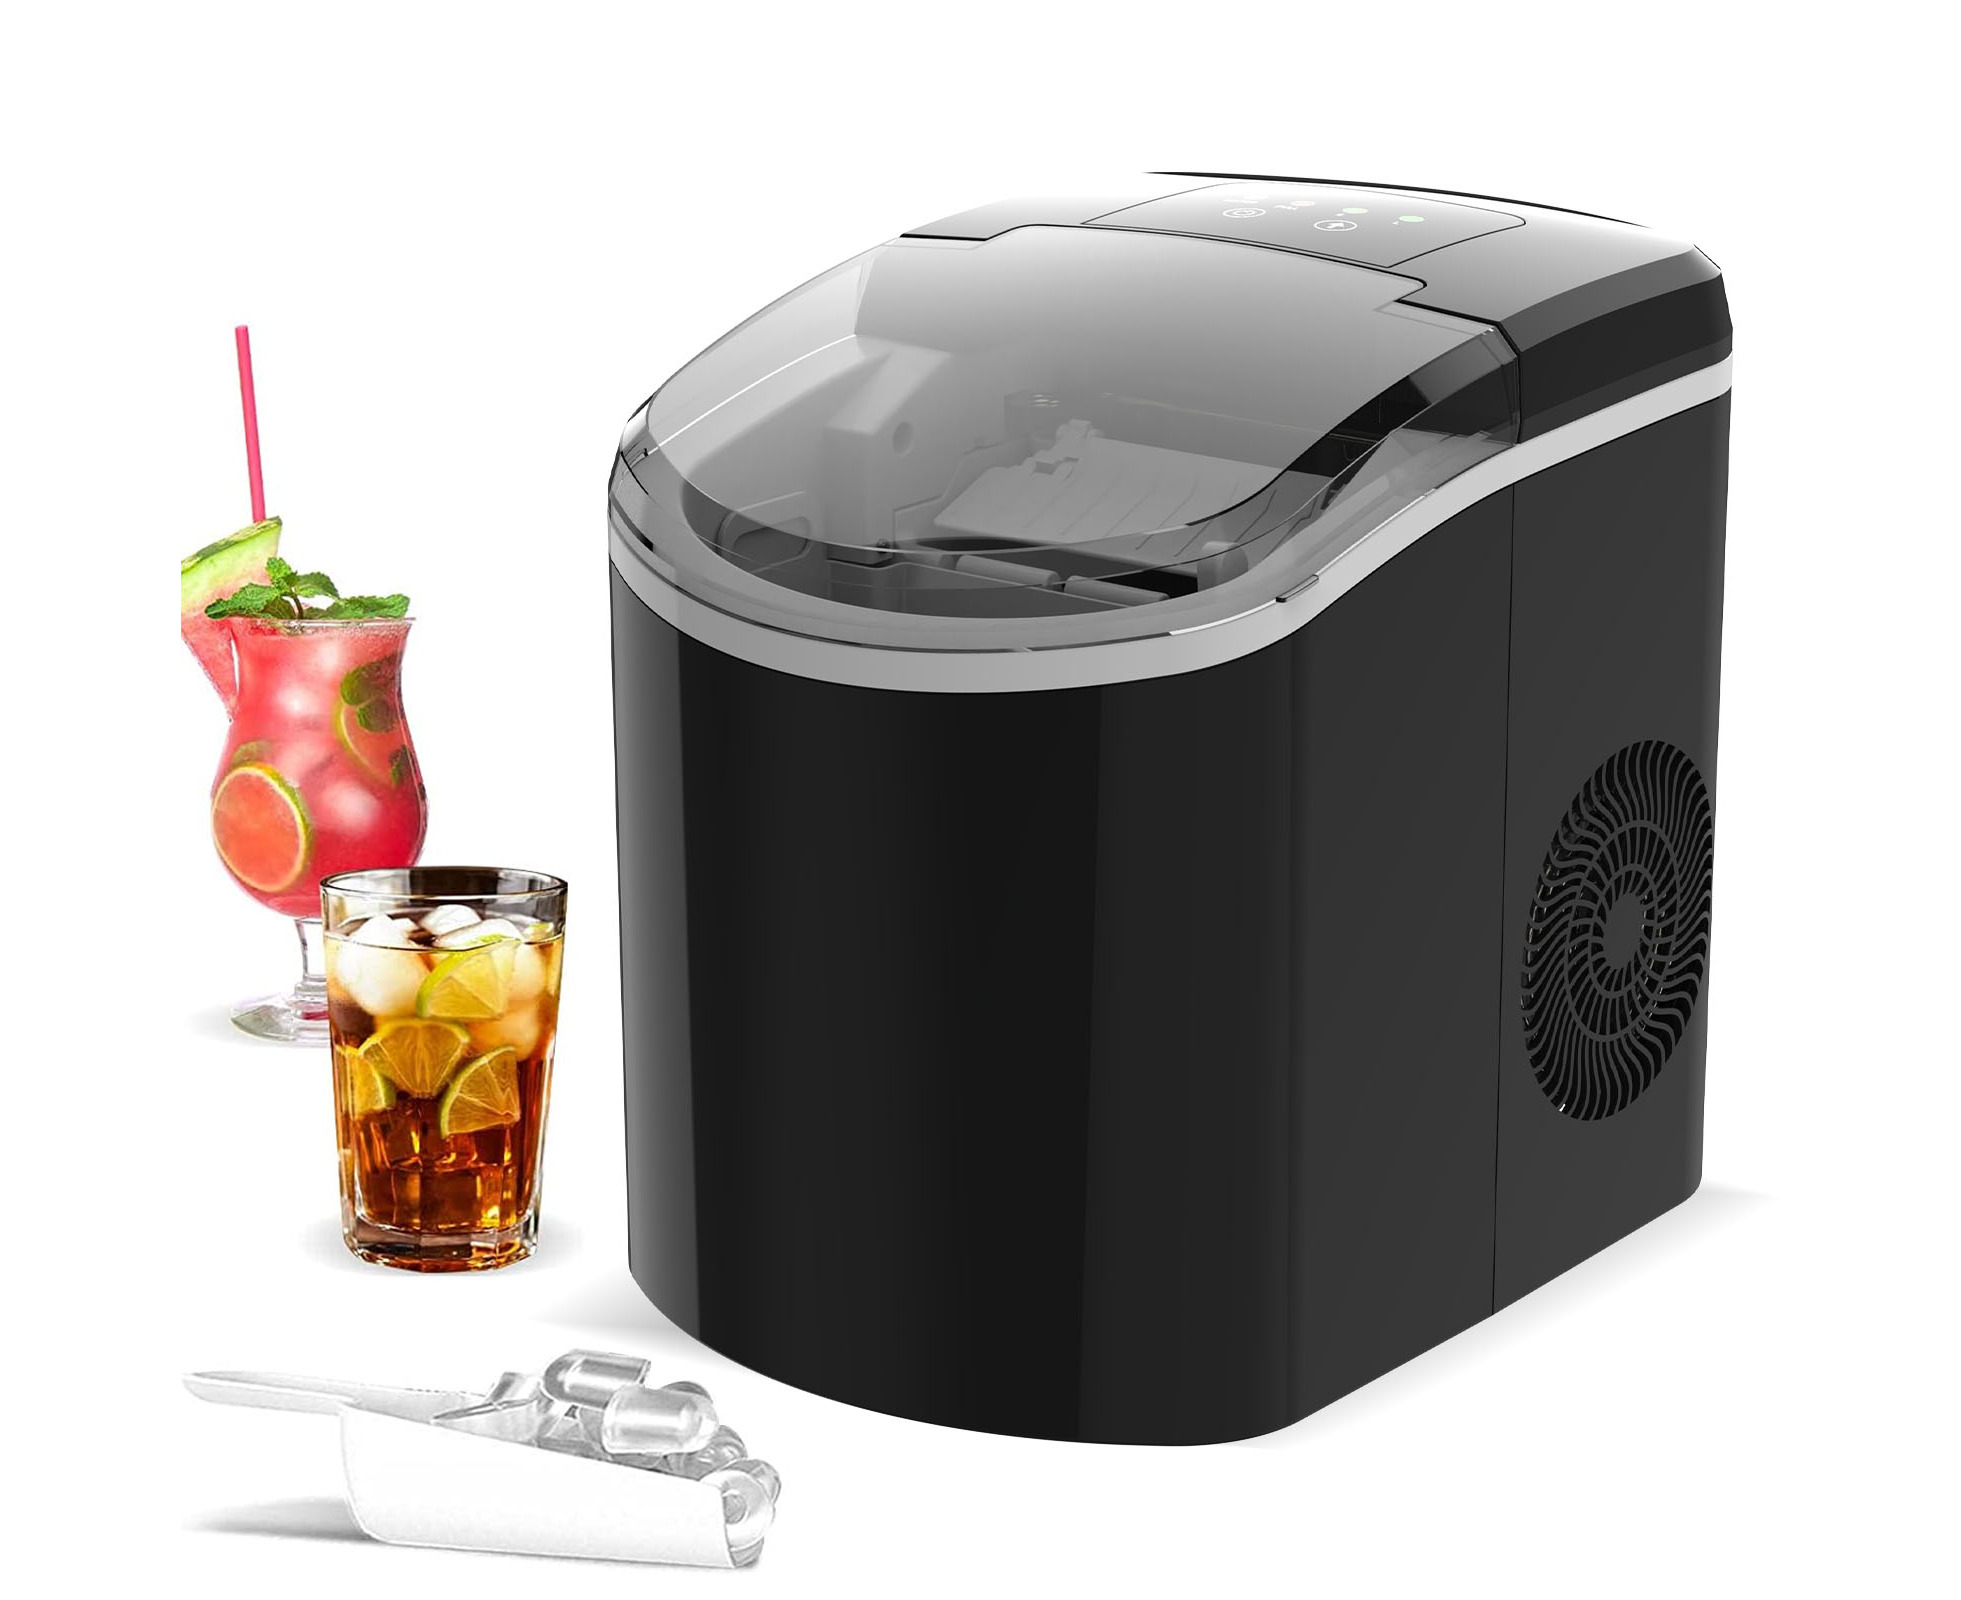 Buy BHTOP Portable Ice Maker Machine for Countertop, Ice Cubes Ready in 6  Mins, Make 26 lbs Ice in 24 Hrs with LED Display Perfect for Parties Mixed  Drinks in Barbie Pink